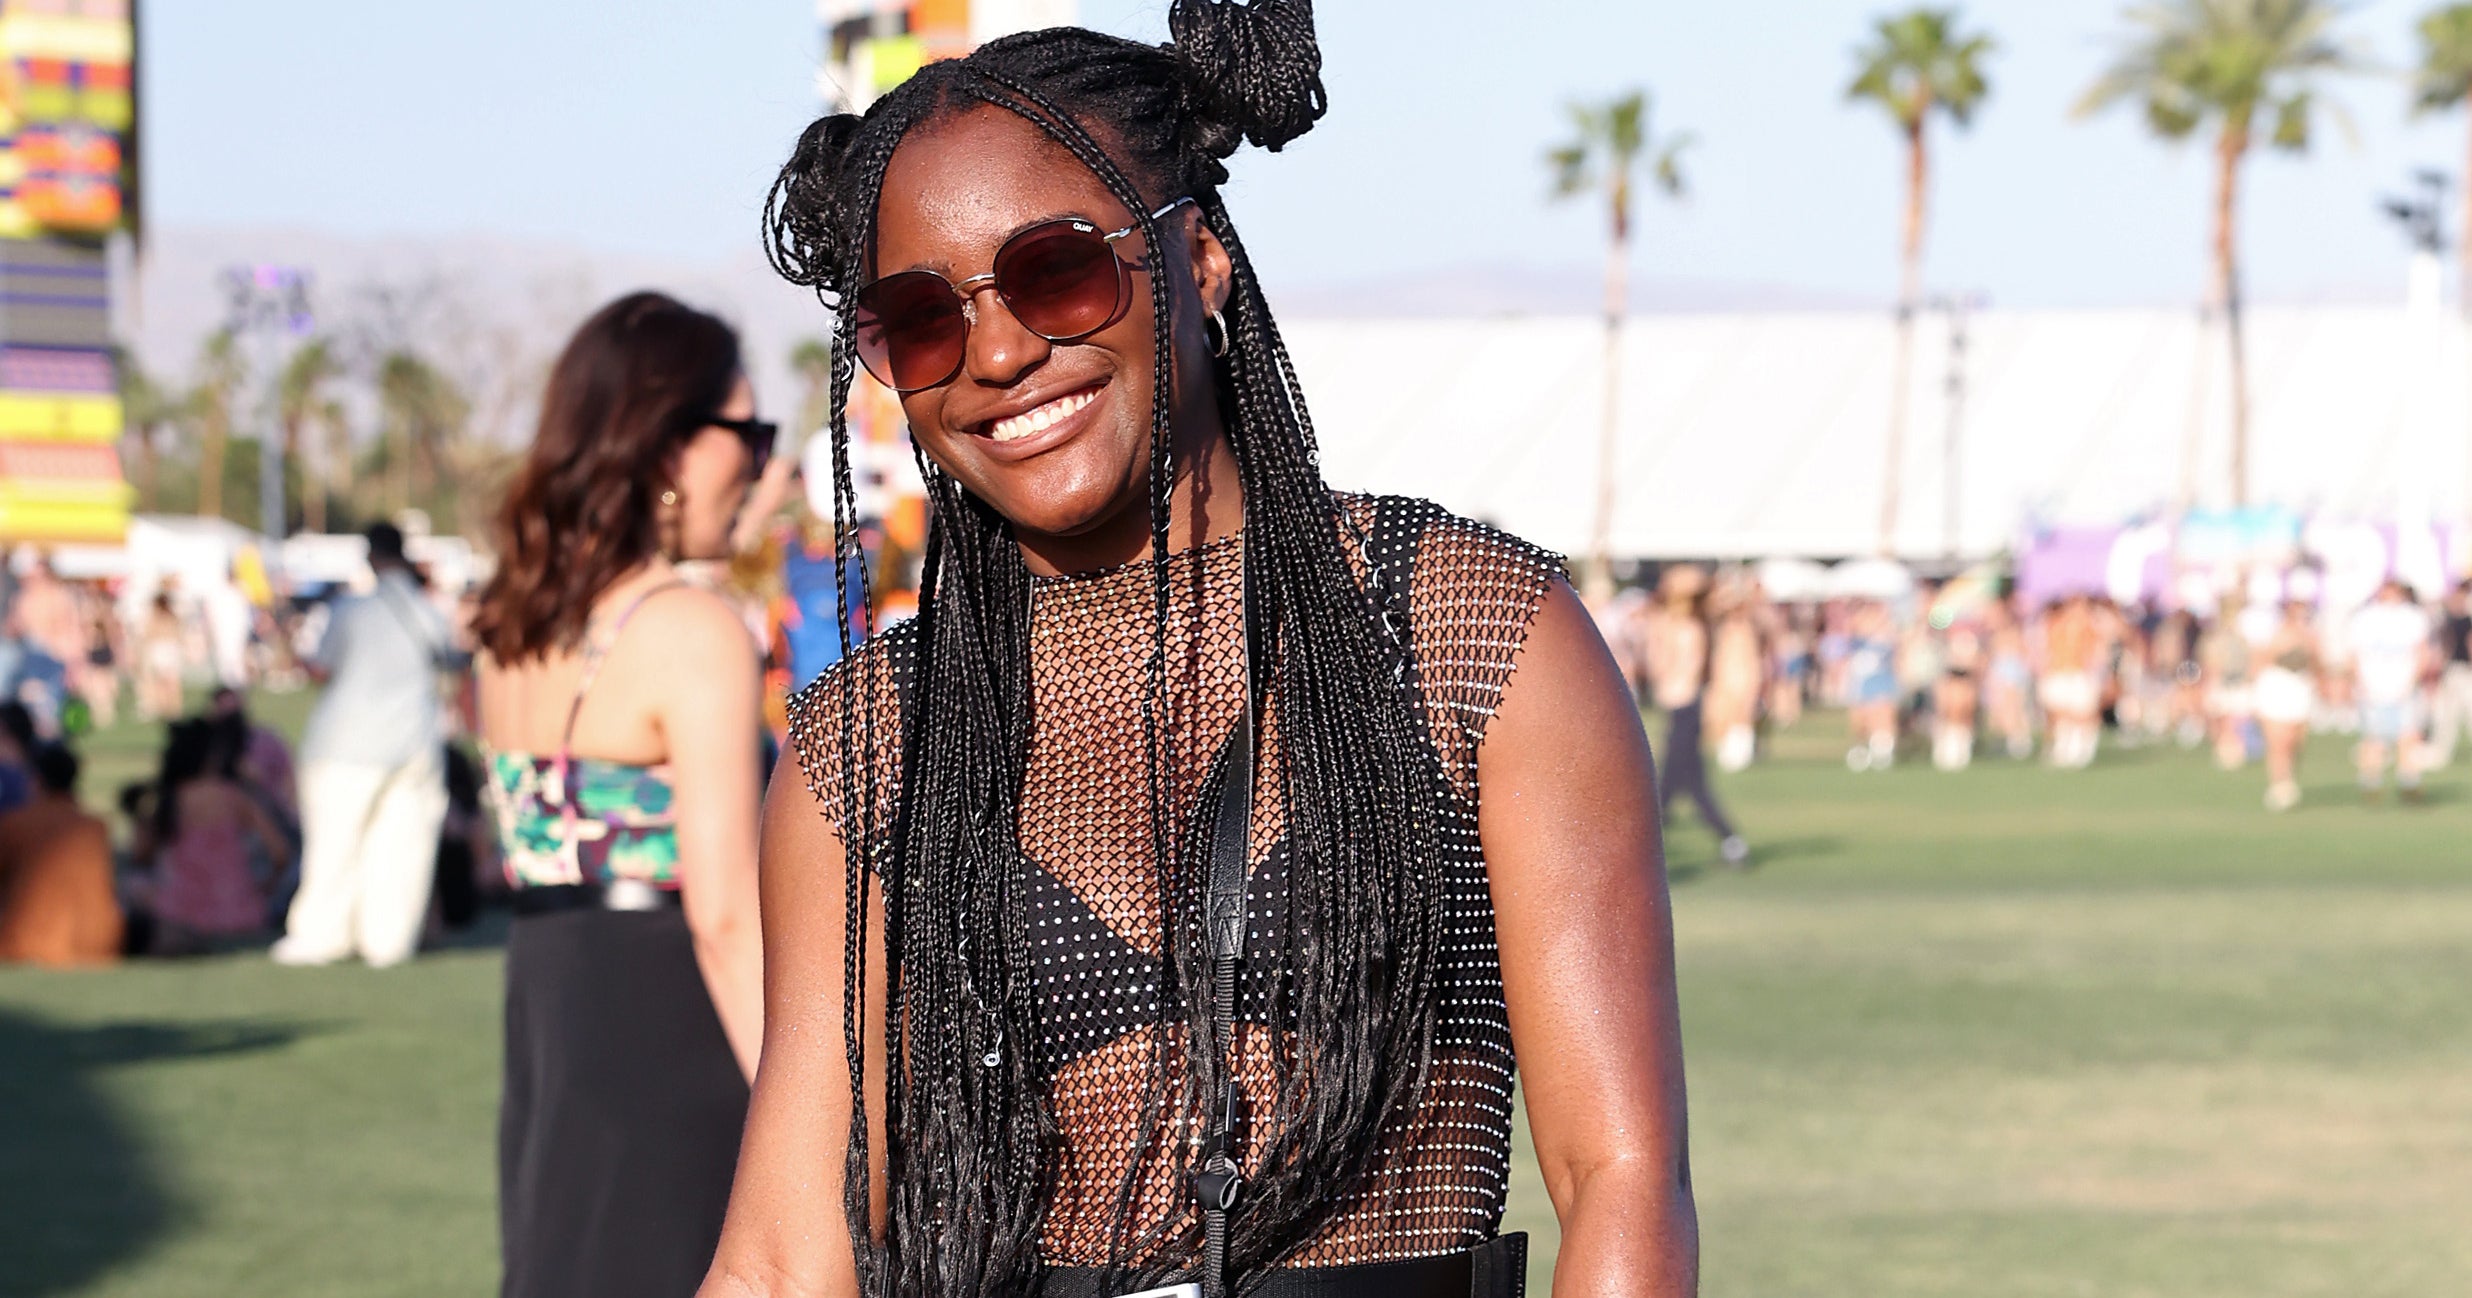 Making a Style Statement at Coachella: Festival Fashion Trends